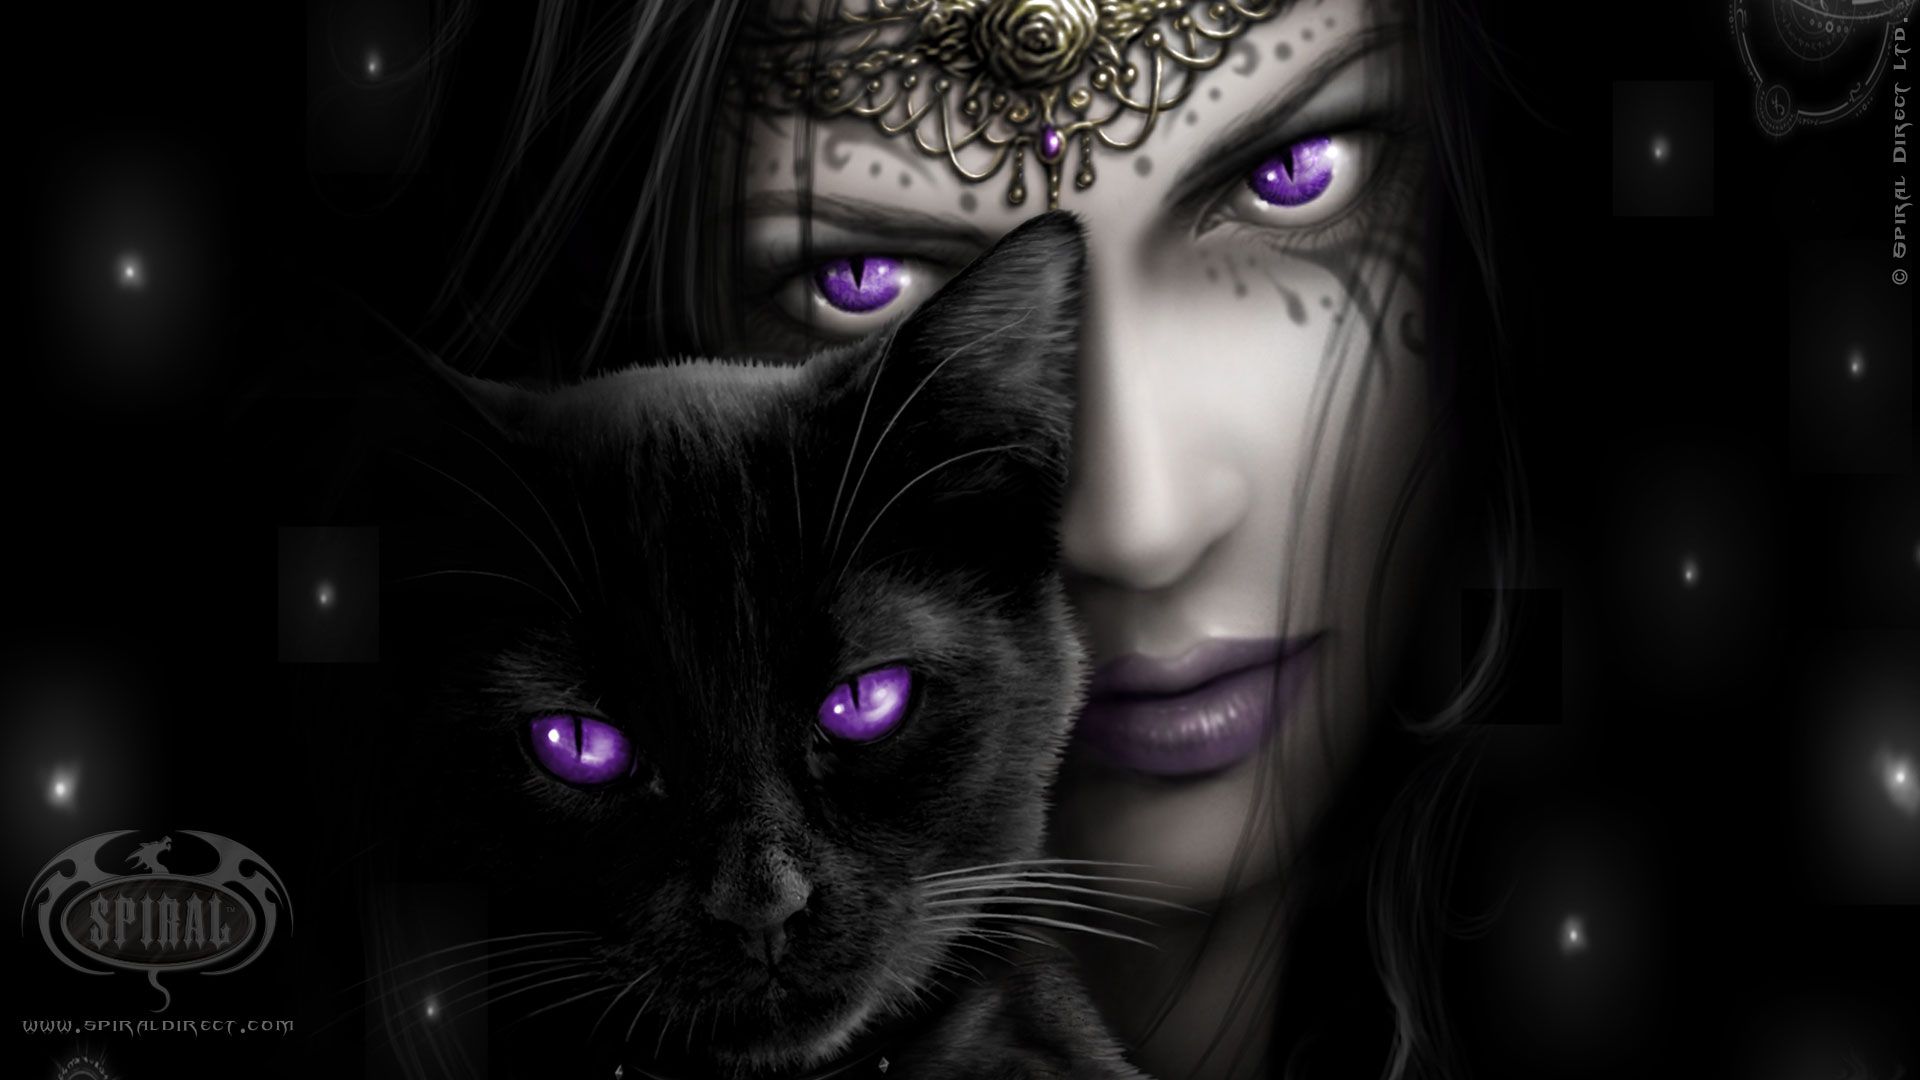 A woman with purple eyes and black cat - Gothic